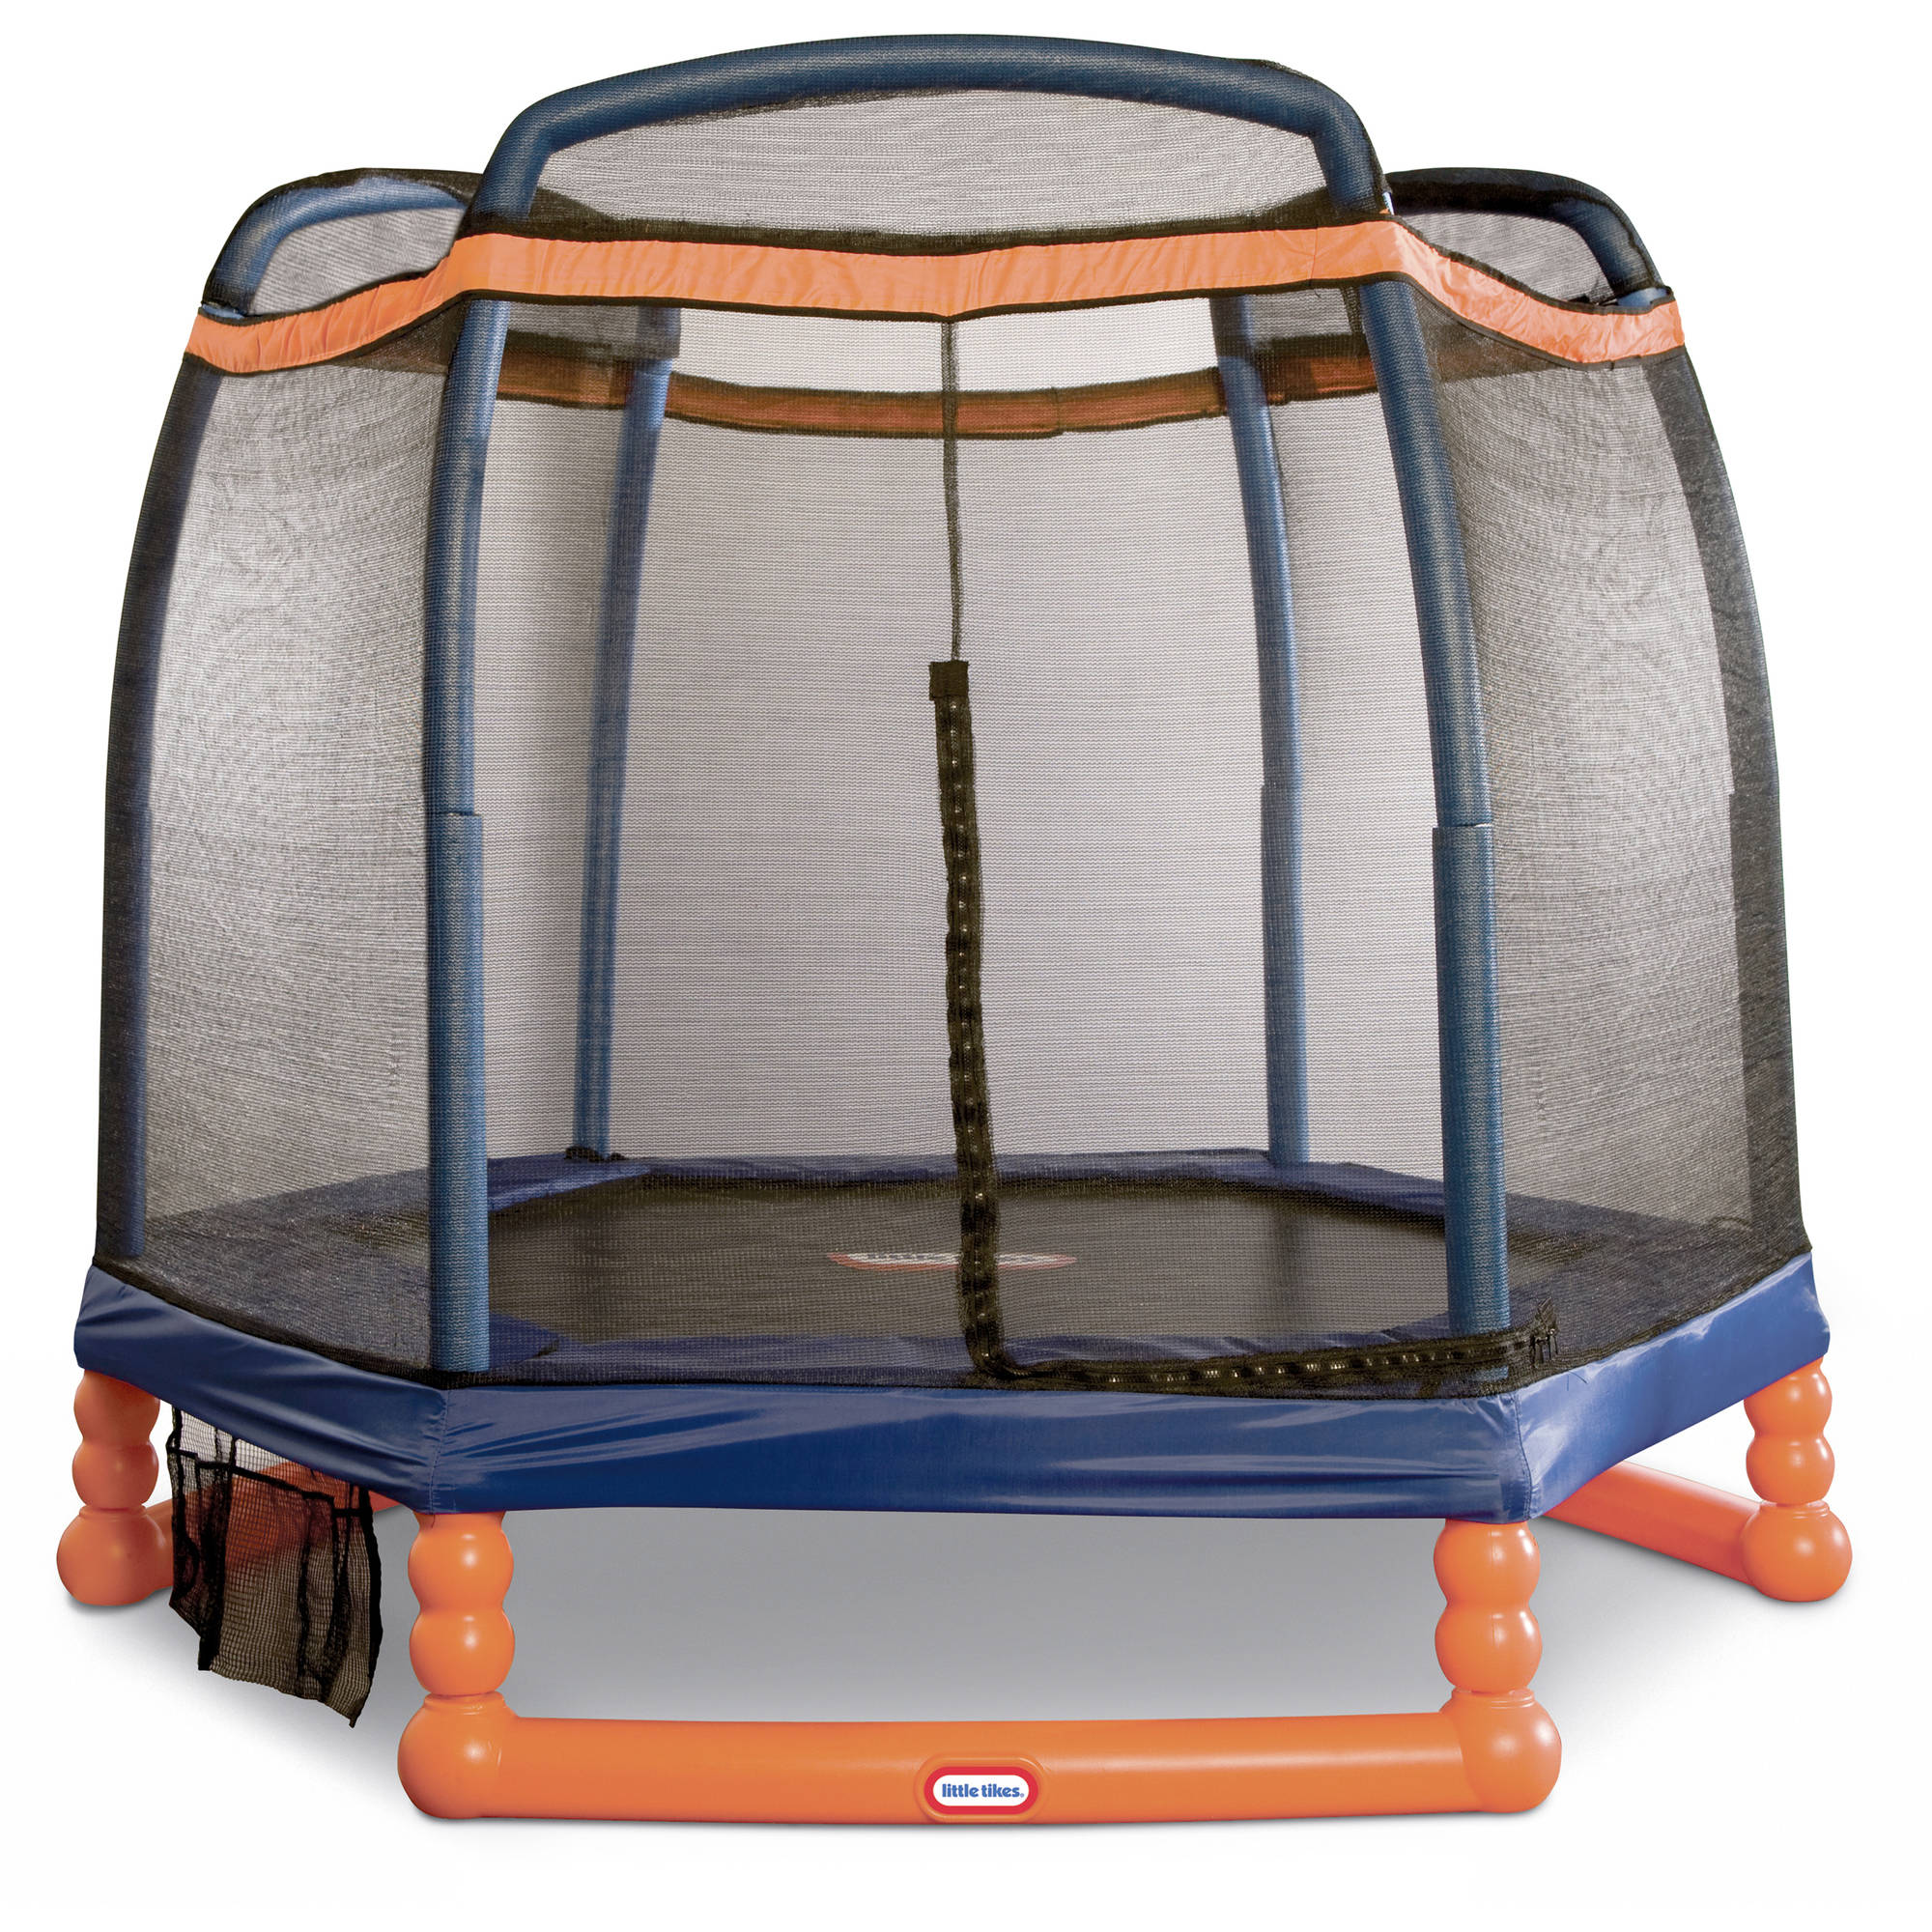 Little Tikes 7-Foot Trampoline, with Enclosure, Blue/Orange - image 1 of 6